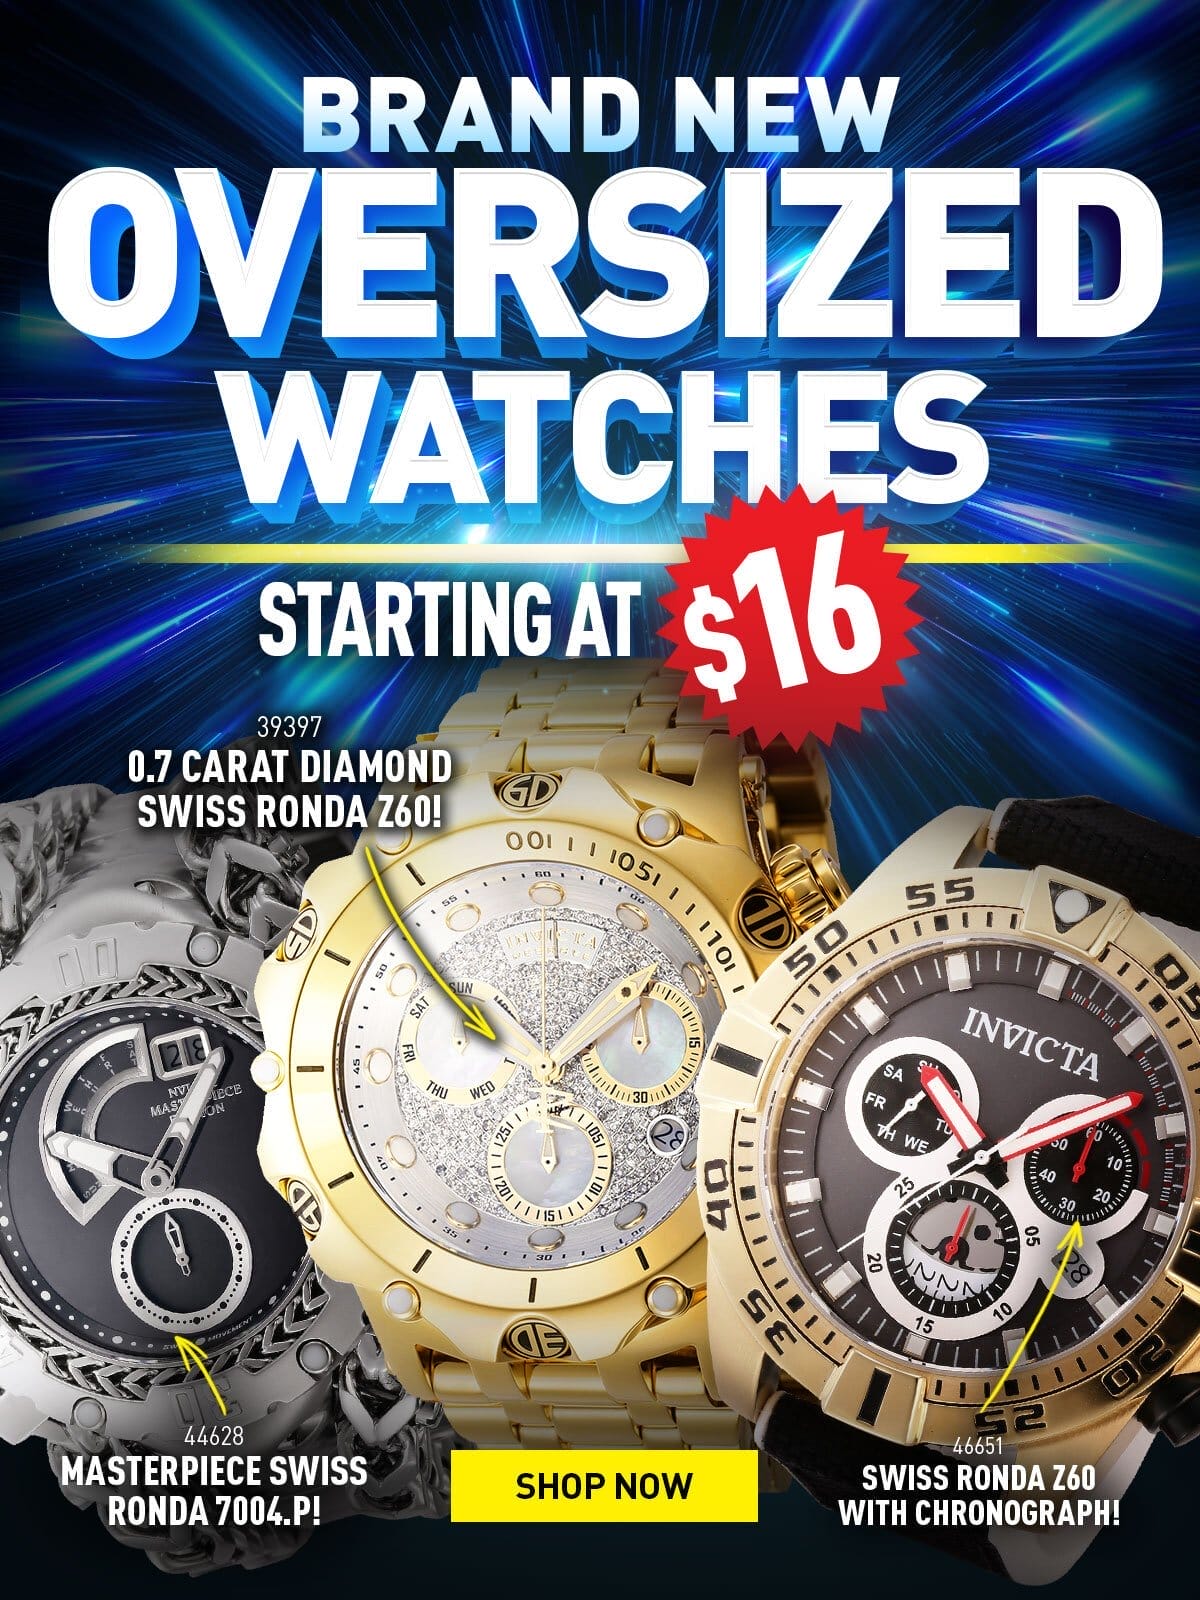 Oversize watches - Starting at \\$16